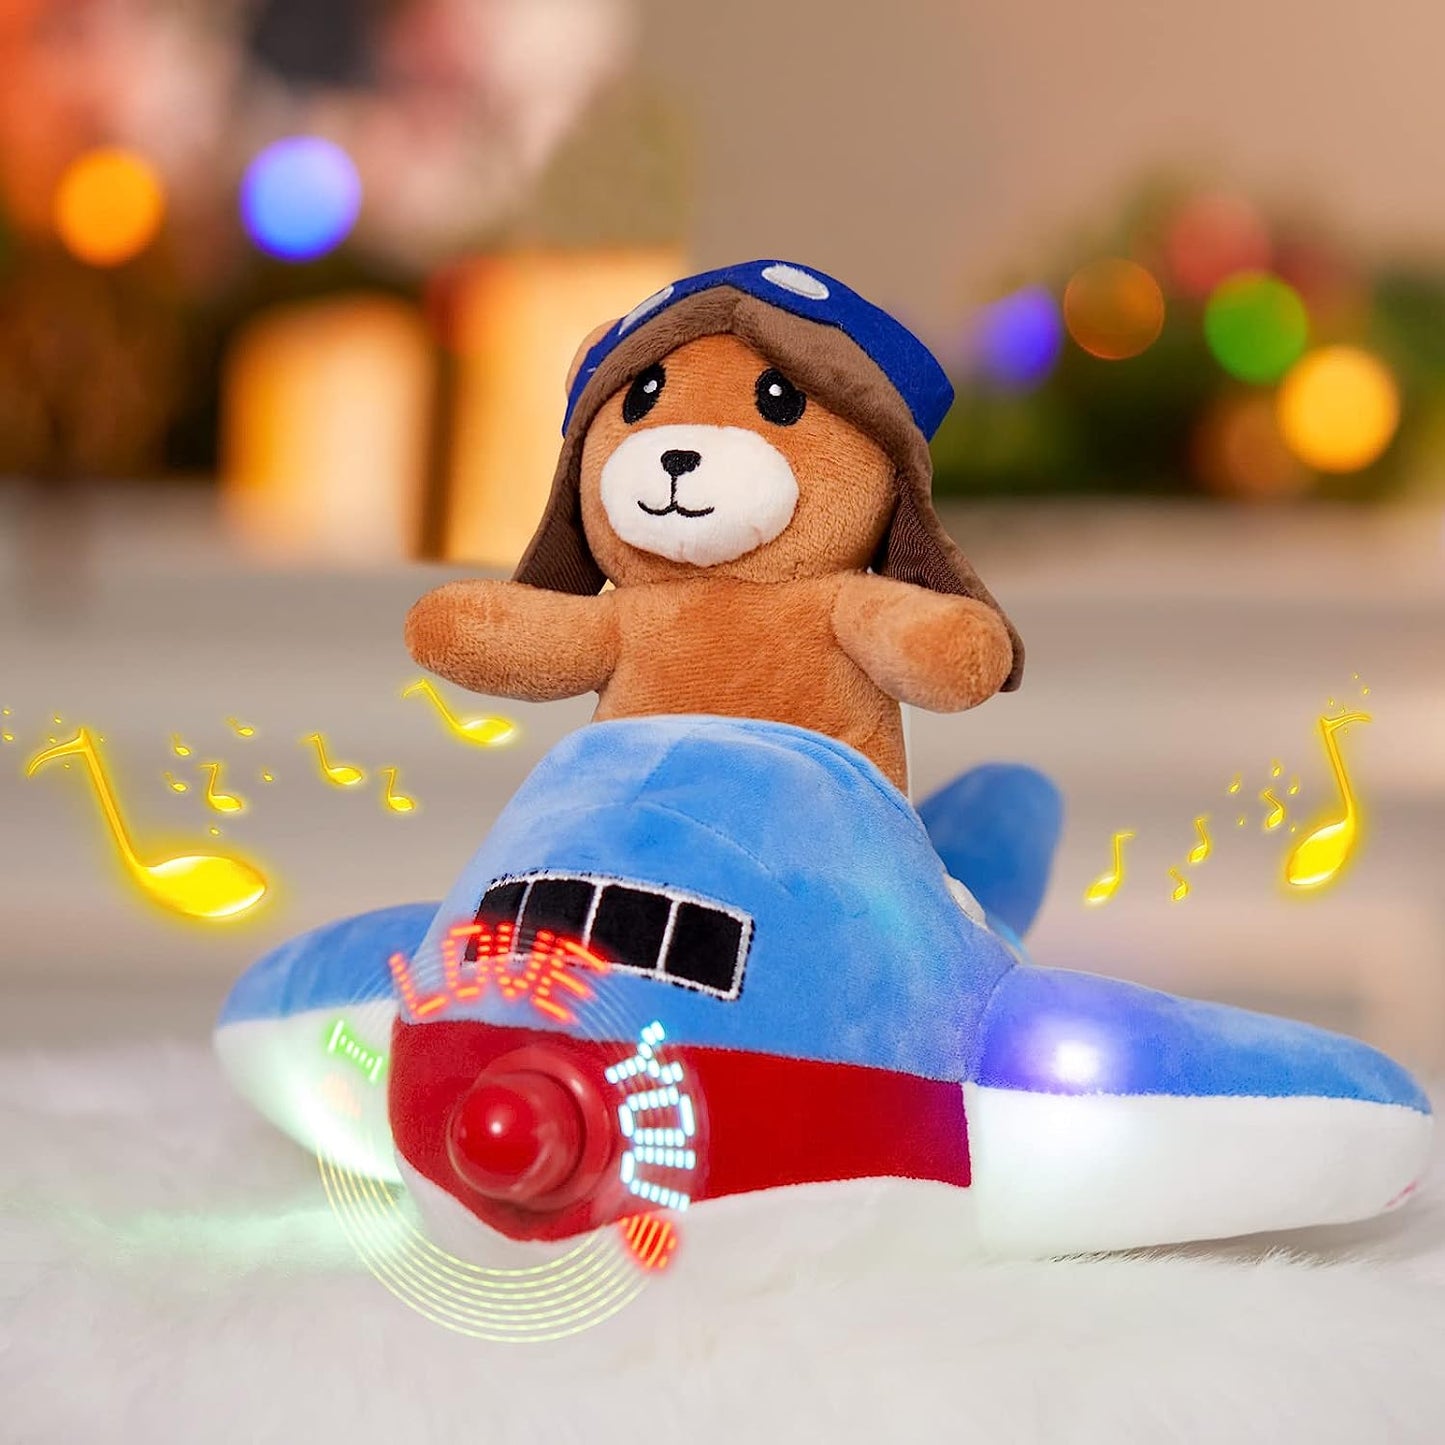 Light up Musical Bear Airplane Stuffed Animal Rotating Propeller Showing LED 'I Love You' with Cute Removable Bear Pilot Plush Toy Birthday Valentine's Day Gifts for Women Boys Girs, 10''